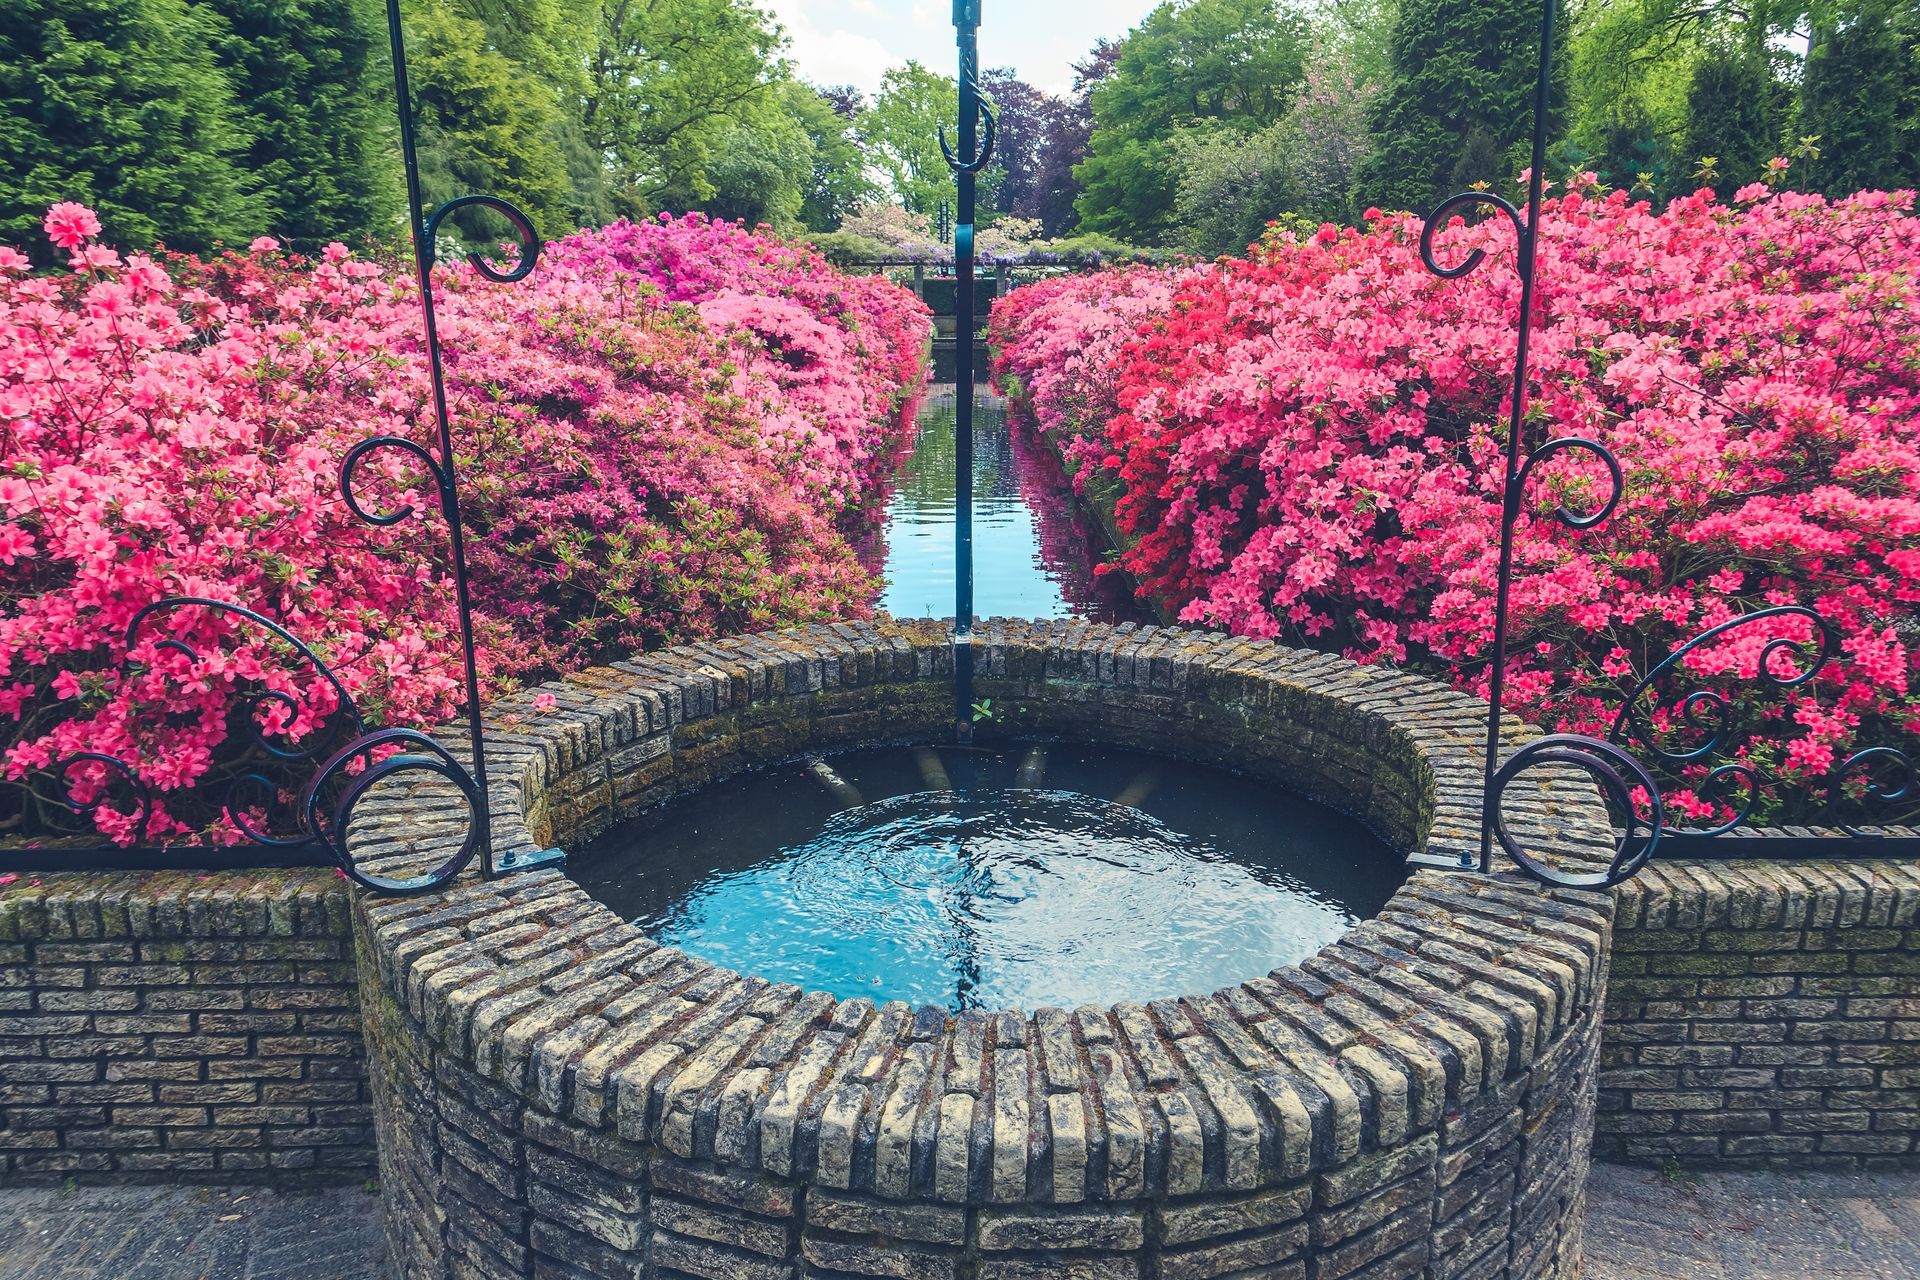 a brick well filled with water in a garden surrounded by pink flowers .